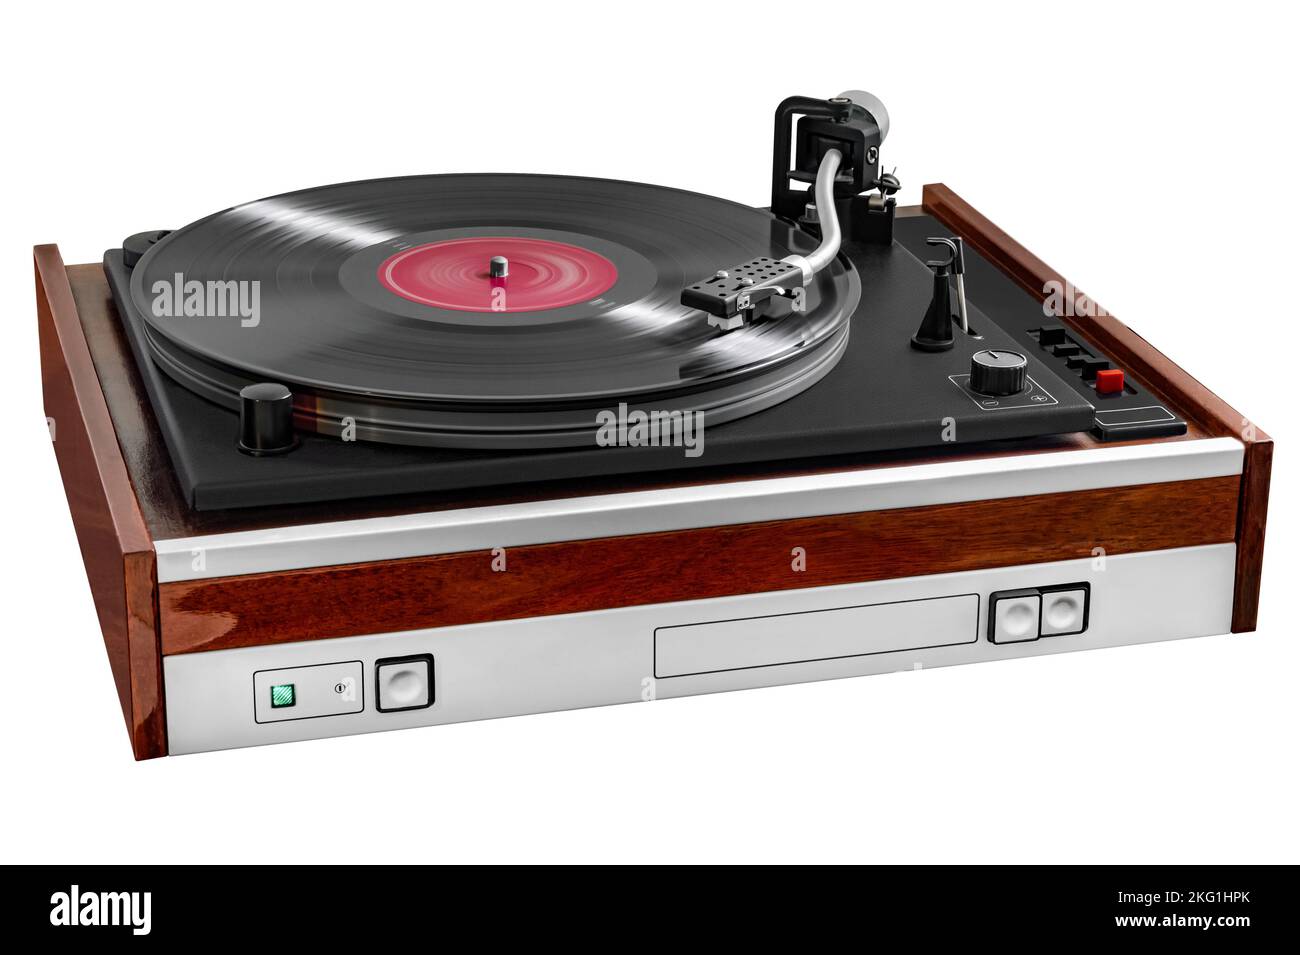 vintage turntable While playing the record. isolated on white background Stock Photo